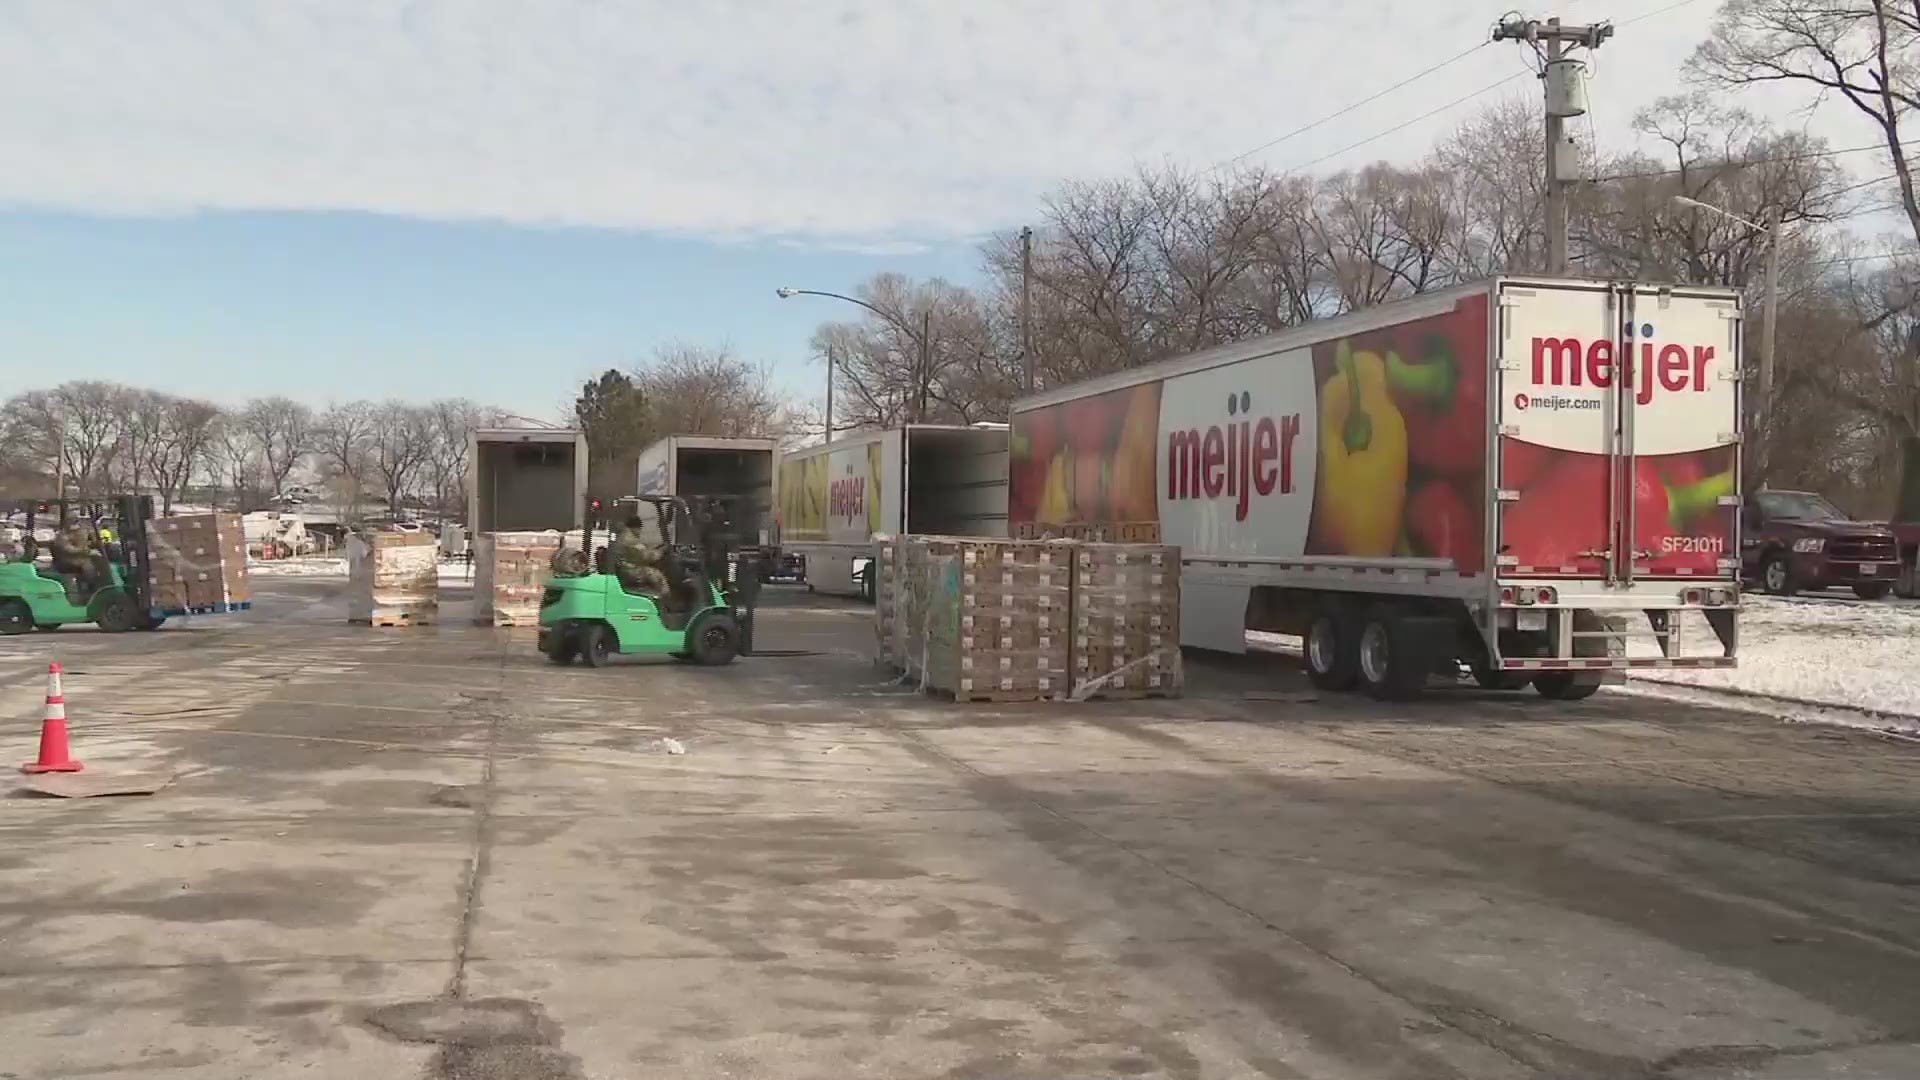 Meijer Kicks Off Massive $1 Million in Turkey Donations. The turkeys will be distributed at the City of Cleveland's Muni Lot directly to food bank clients.